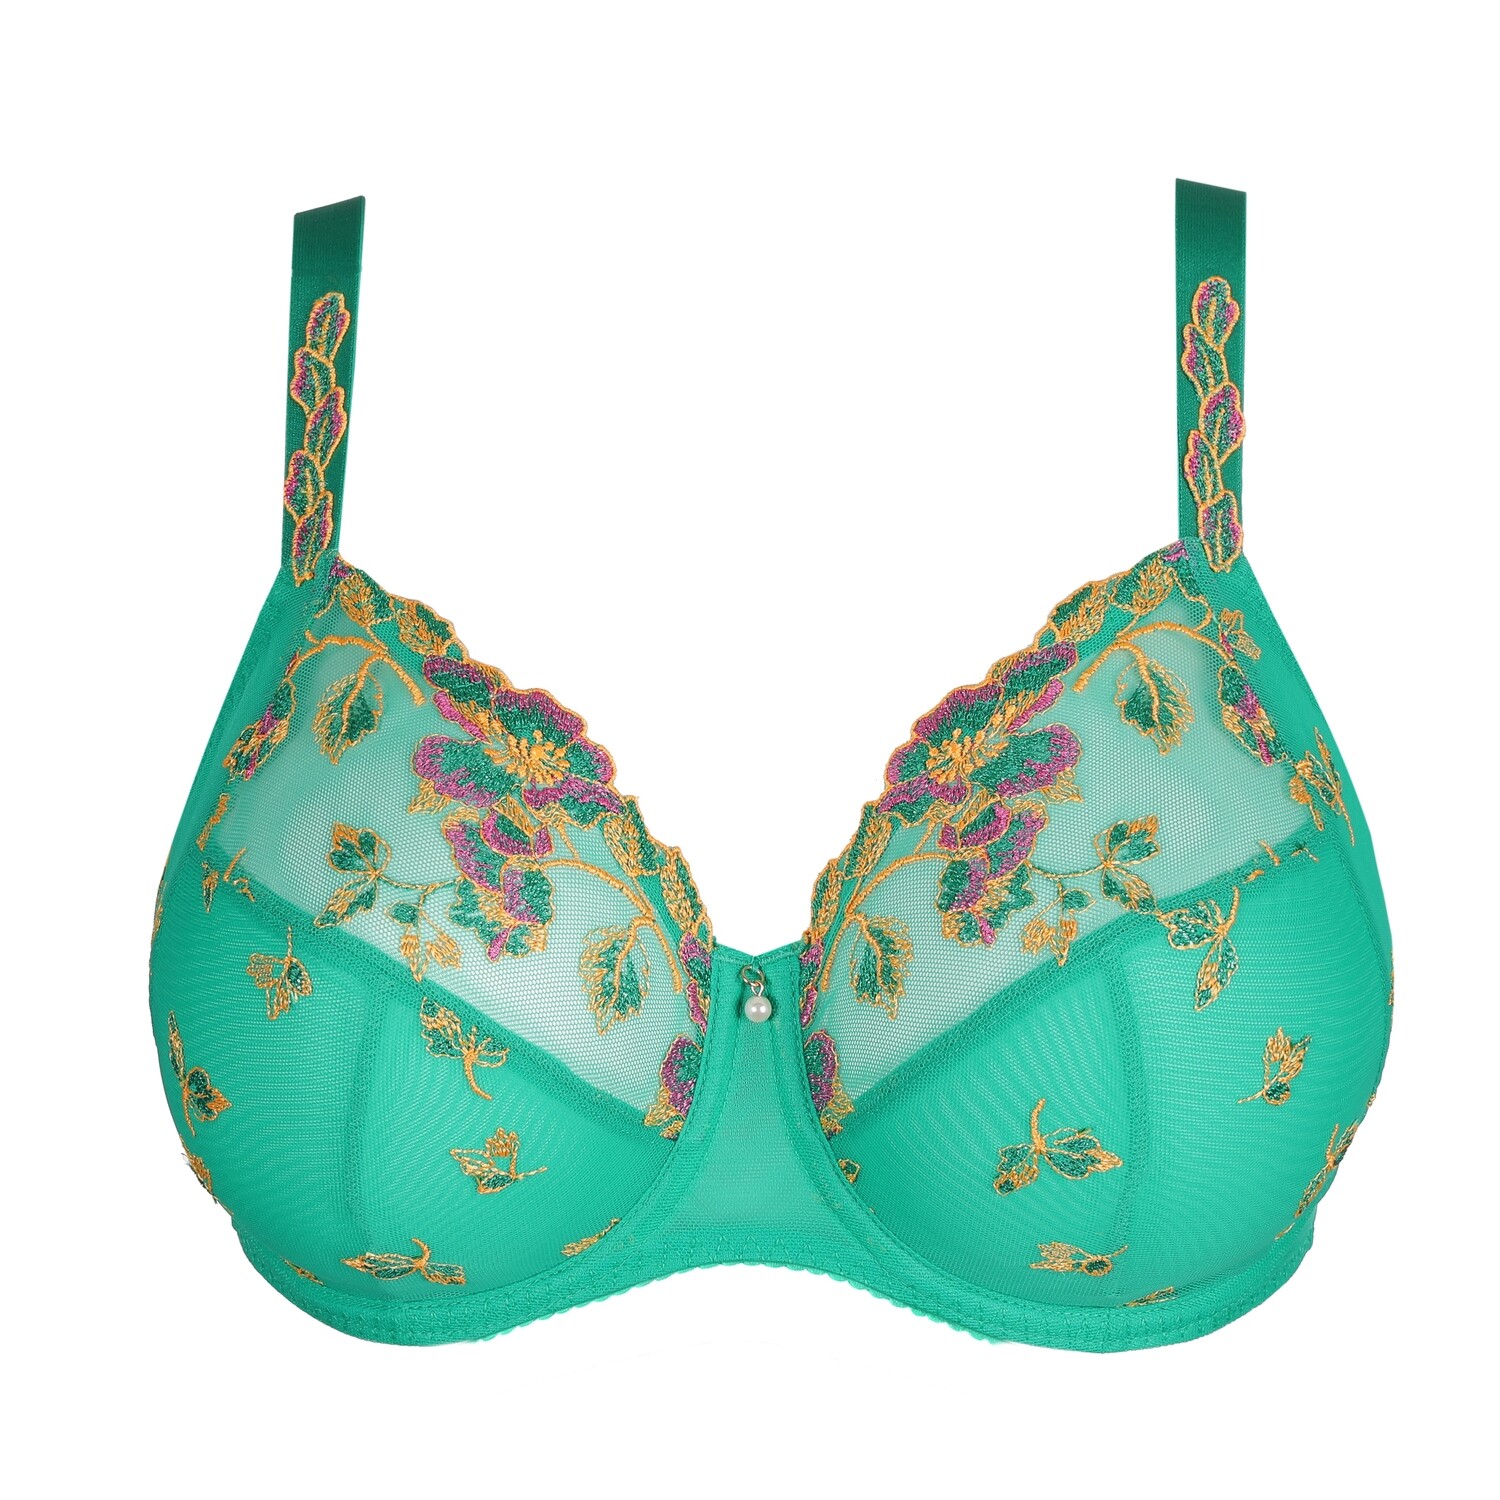 PRIMA DONNA LENCA SUNNY TEAL
volle cup bh met beugel